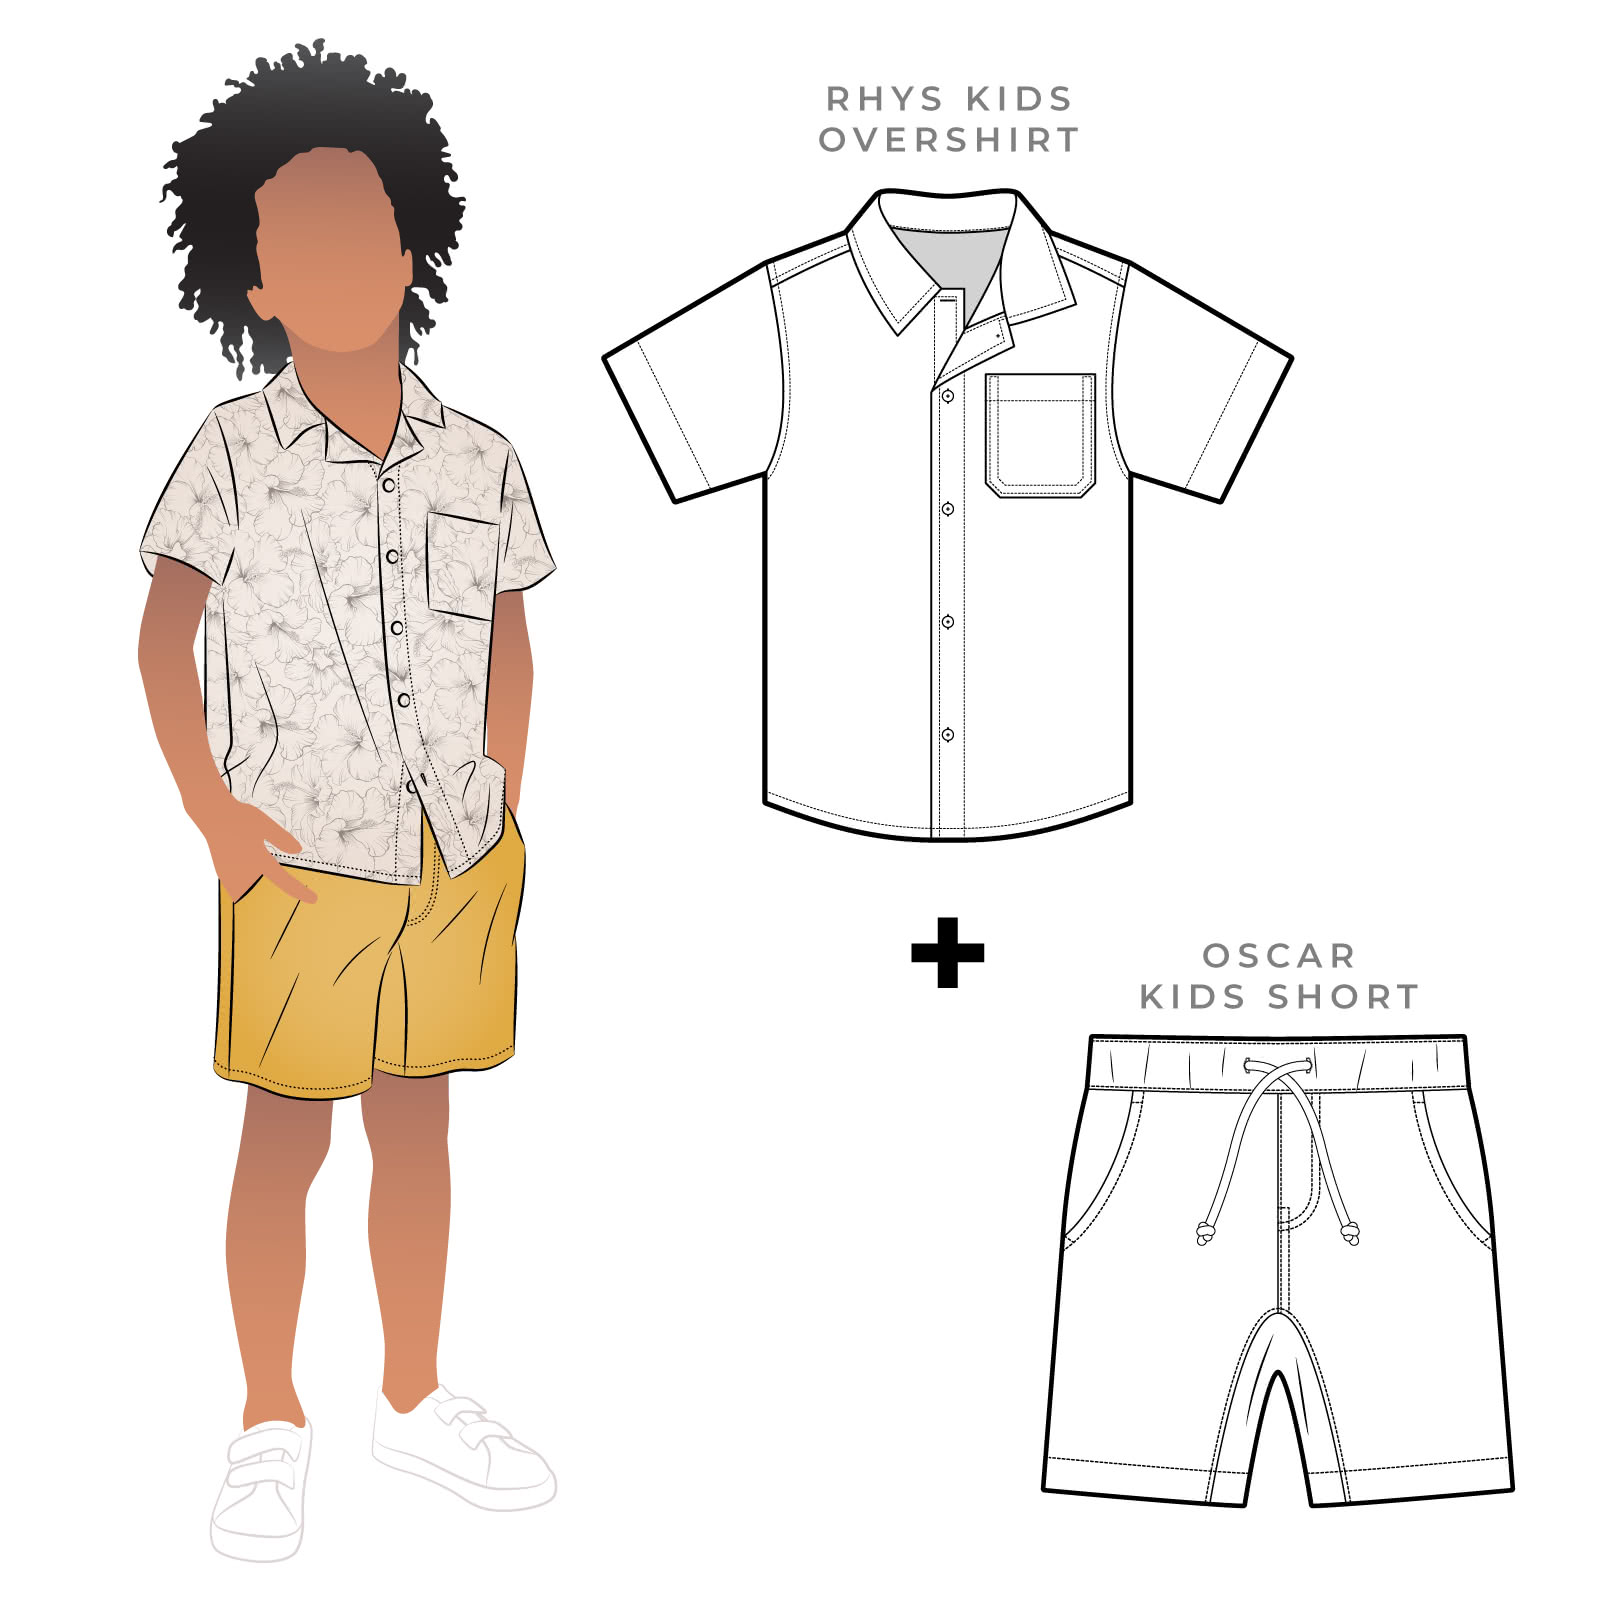 Rhys Kids Overshirt and Oscar Kids Short By Style Arc - In this fabulous discounted pattern bundle you will receive our Oscar Kids Short and Rhys Kids Overshirt, for kids 2-8